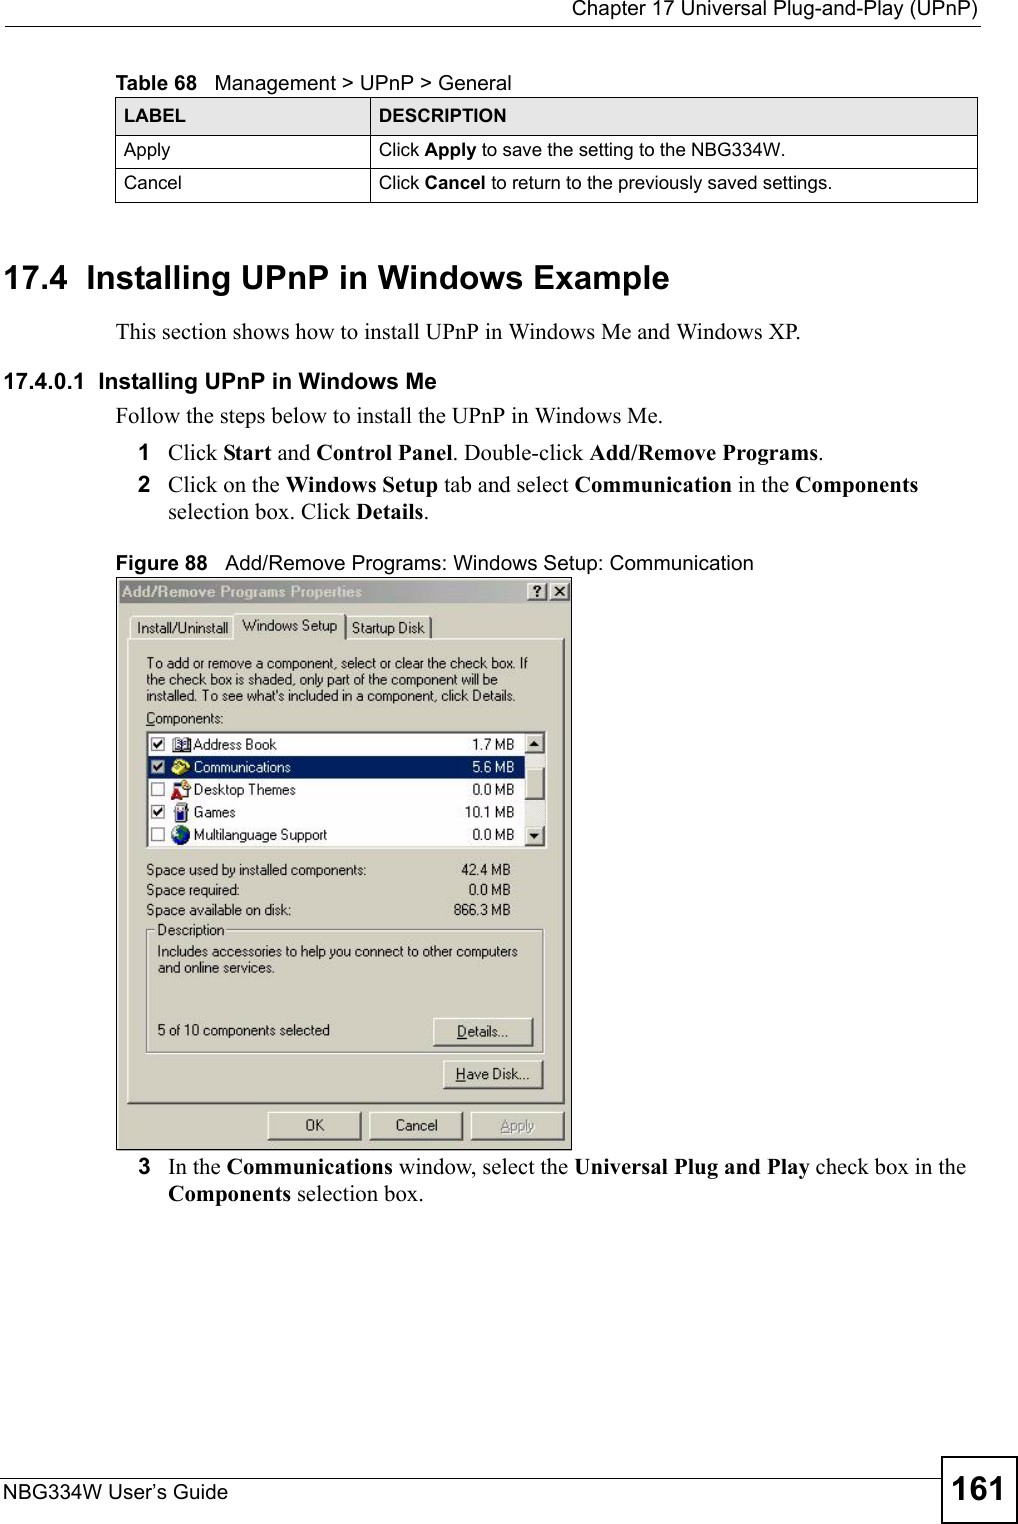  Chapter 17 Universal Plug-and-Play (UPnP)NBG334W User’s Guide 16117.4  Installing UPnP in Windows ExampleThis section shows how to install UPnP in Windows Me and Windows XP. 17.4.0.1  Installing UPnP in Windows MeFollow the steps below to install the UPnP in Windows Me. 1Click Start and Control Panel. Double-click Add/Remove Programs.2Click on the Windows Setup tab and select Communication in the Components selection box. Click Details. Figure 88   Add/Remove Programs: Windows Setup: Communication 3In the Communications window, select the Universal Plug and Play check box in the Components selection box. Apply Click Apply to save the setting to the NBG334W.Cancel Click Cancel to return to the previously saved settings.Table 68   Management &gt; UPnP &gt; GeneralLABEL DESCRIPTION